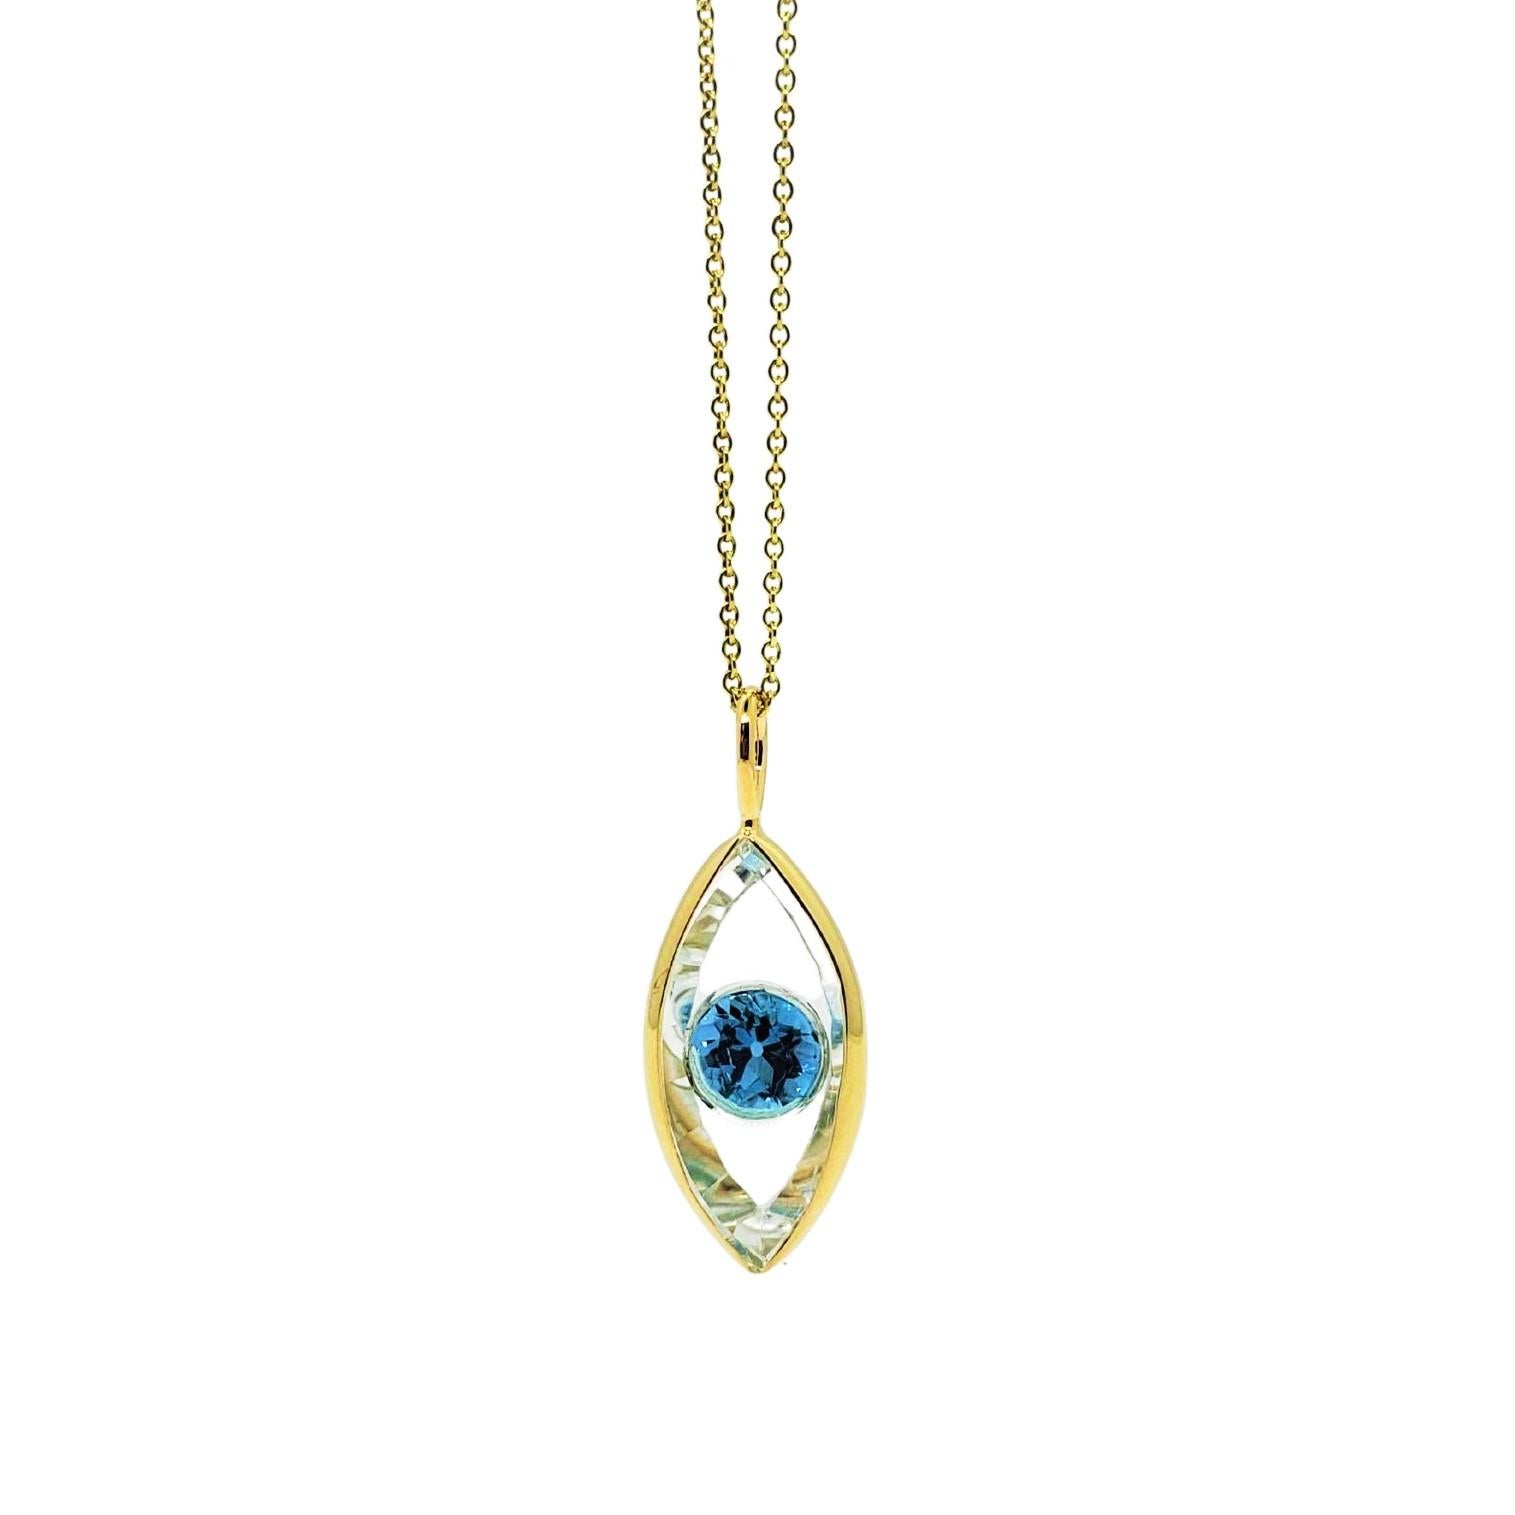 Neoclassical Protective Evil Eye Necklace in 14K Gold and Quartz with Blue Topaz or Peridot For Sale